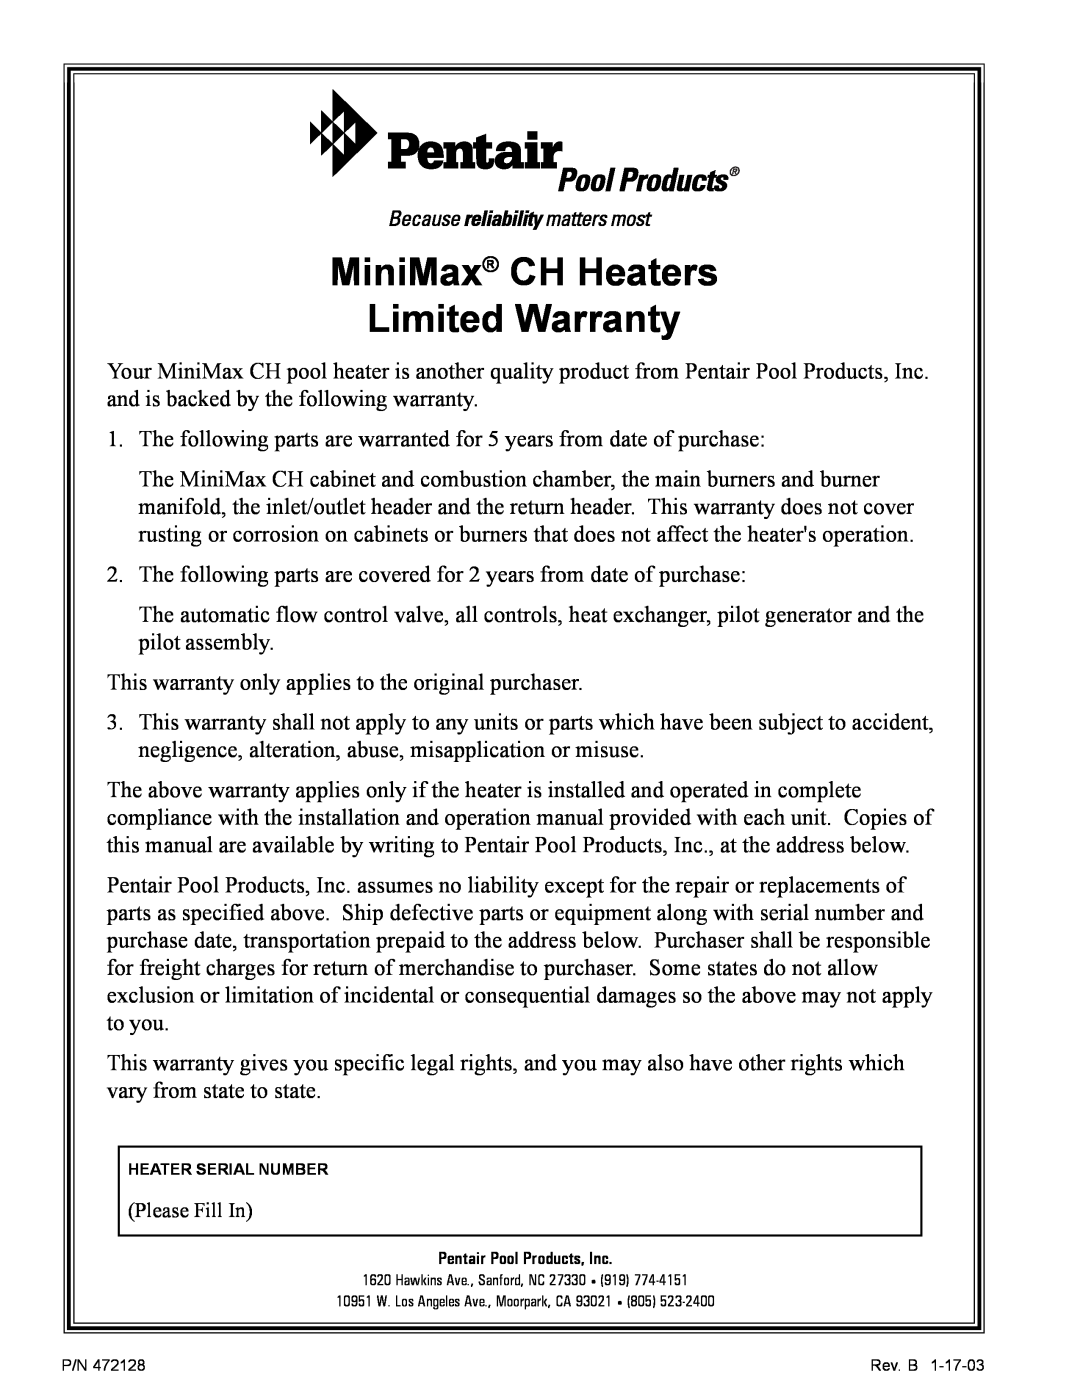 Pentair installation manual MiniMax CH Heaters Limited Warranty, Please Fill In 